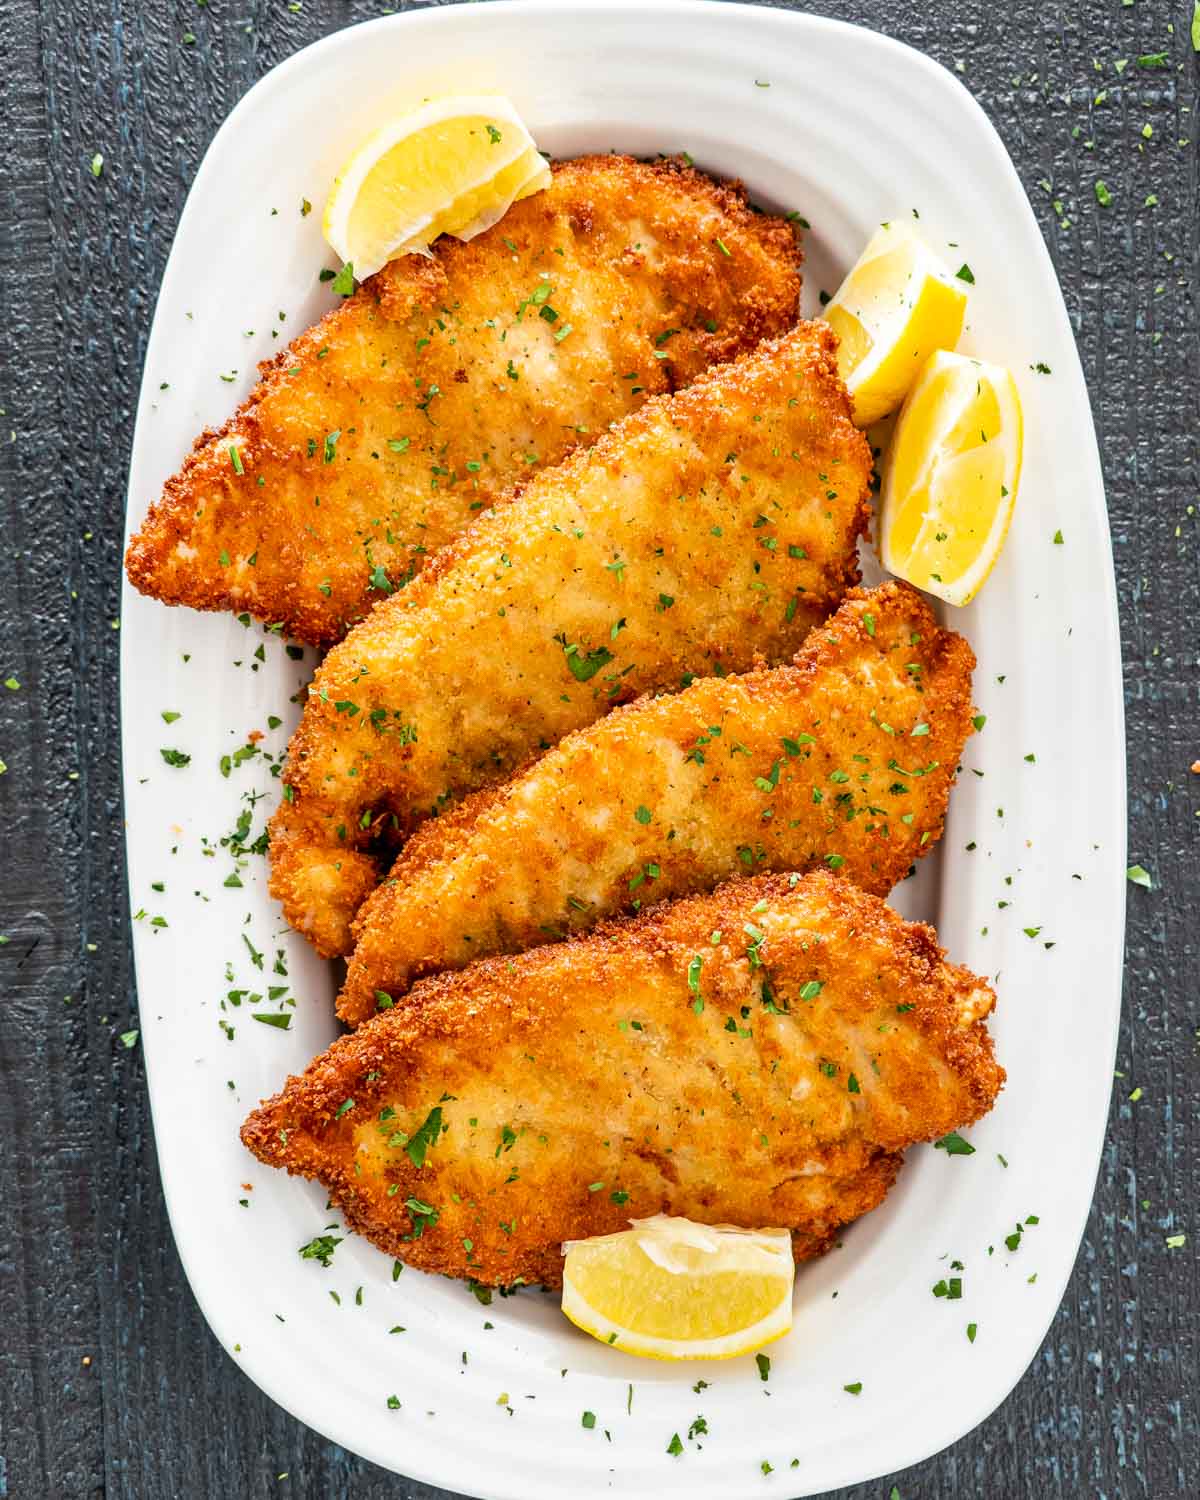 freshly made chicken schnitzel on a platter with lemon wedges.